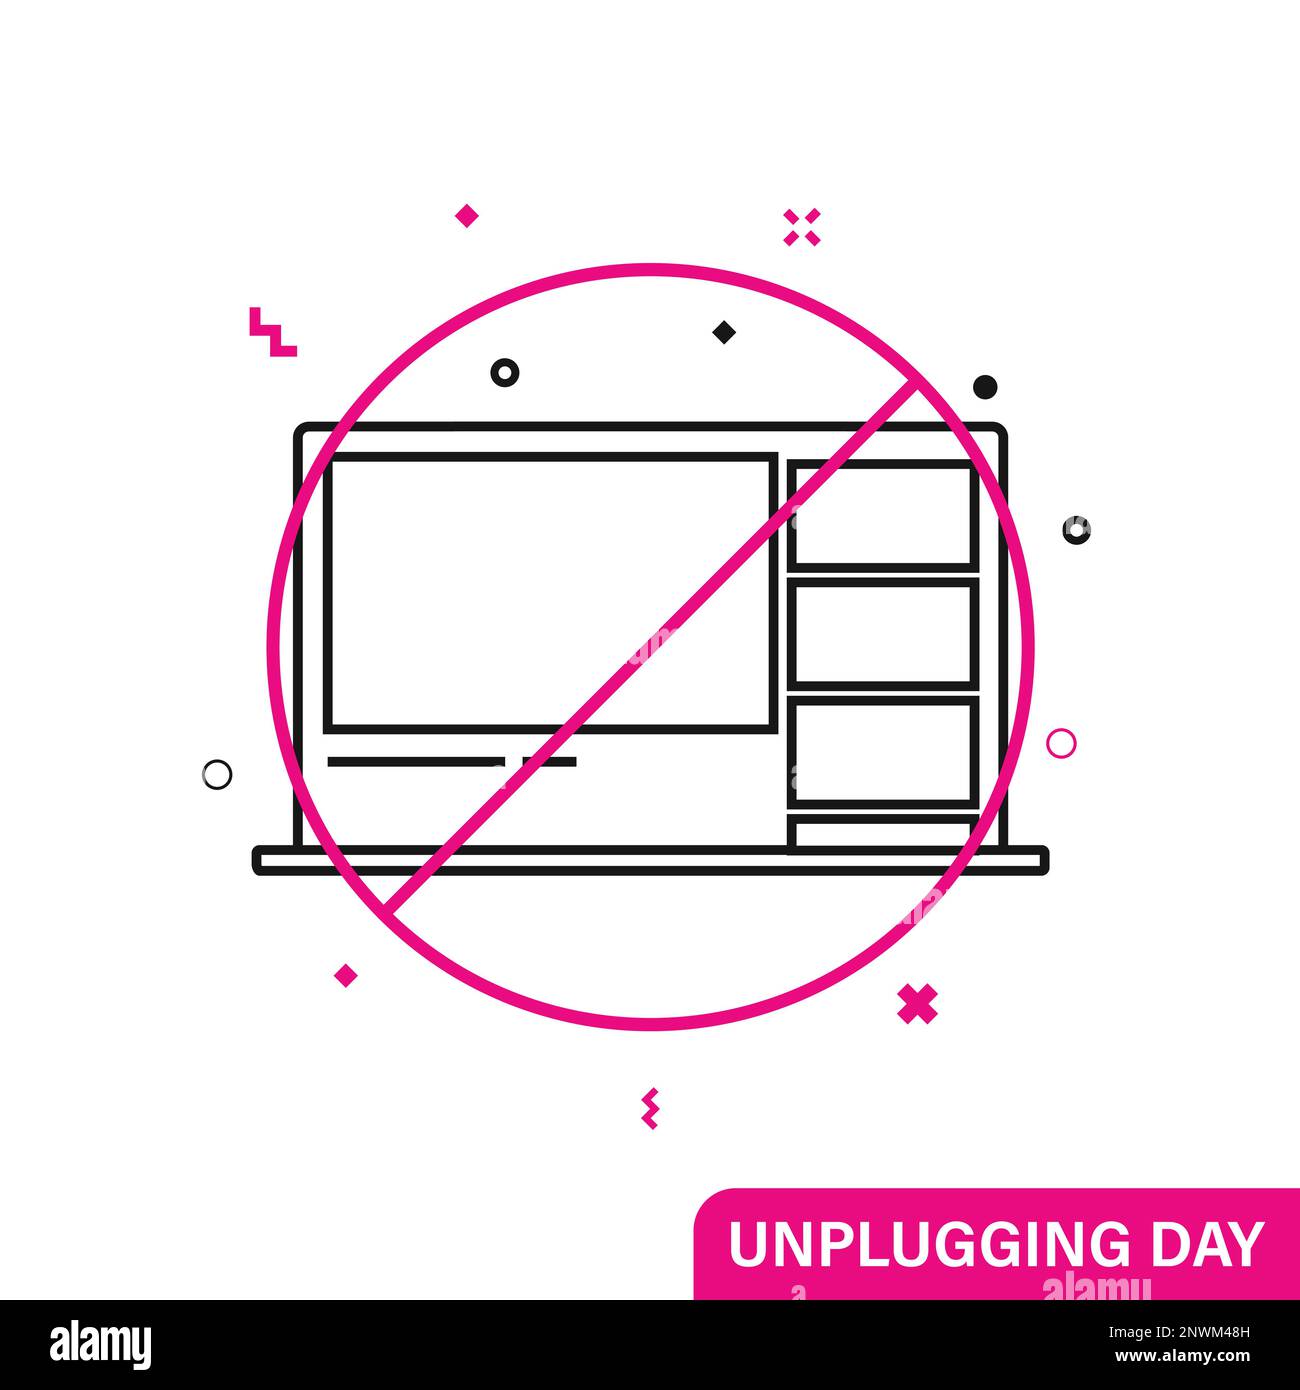 National Day of Unplugging. Turn off devices. Line flat symbol Stock Vector